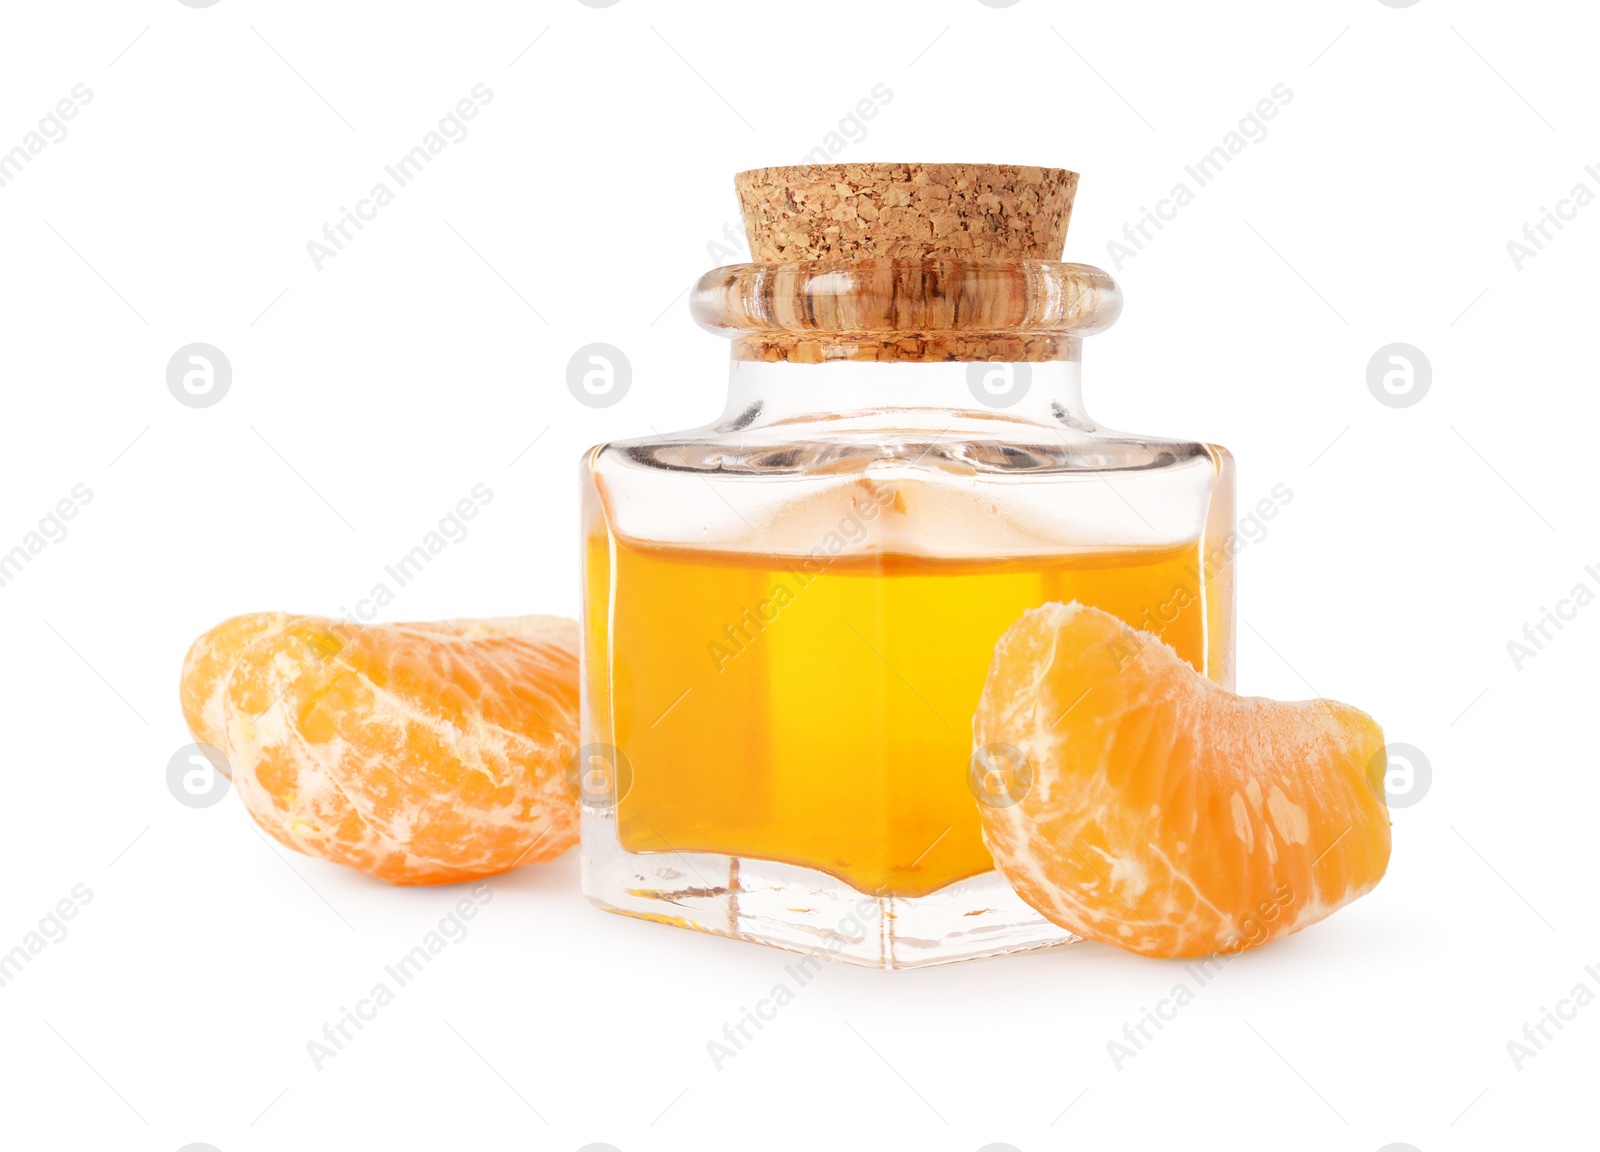 Photo of Aromatic tangerine essential oil in bottle and citrus fruit isolated on white